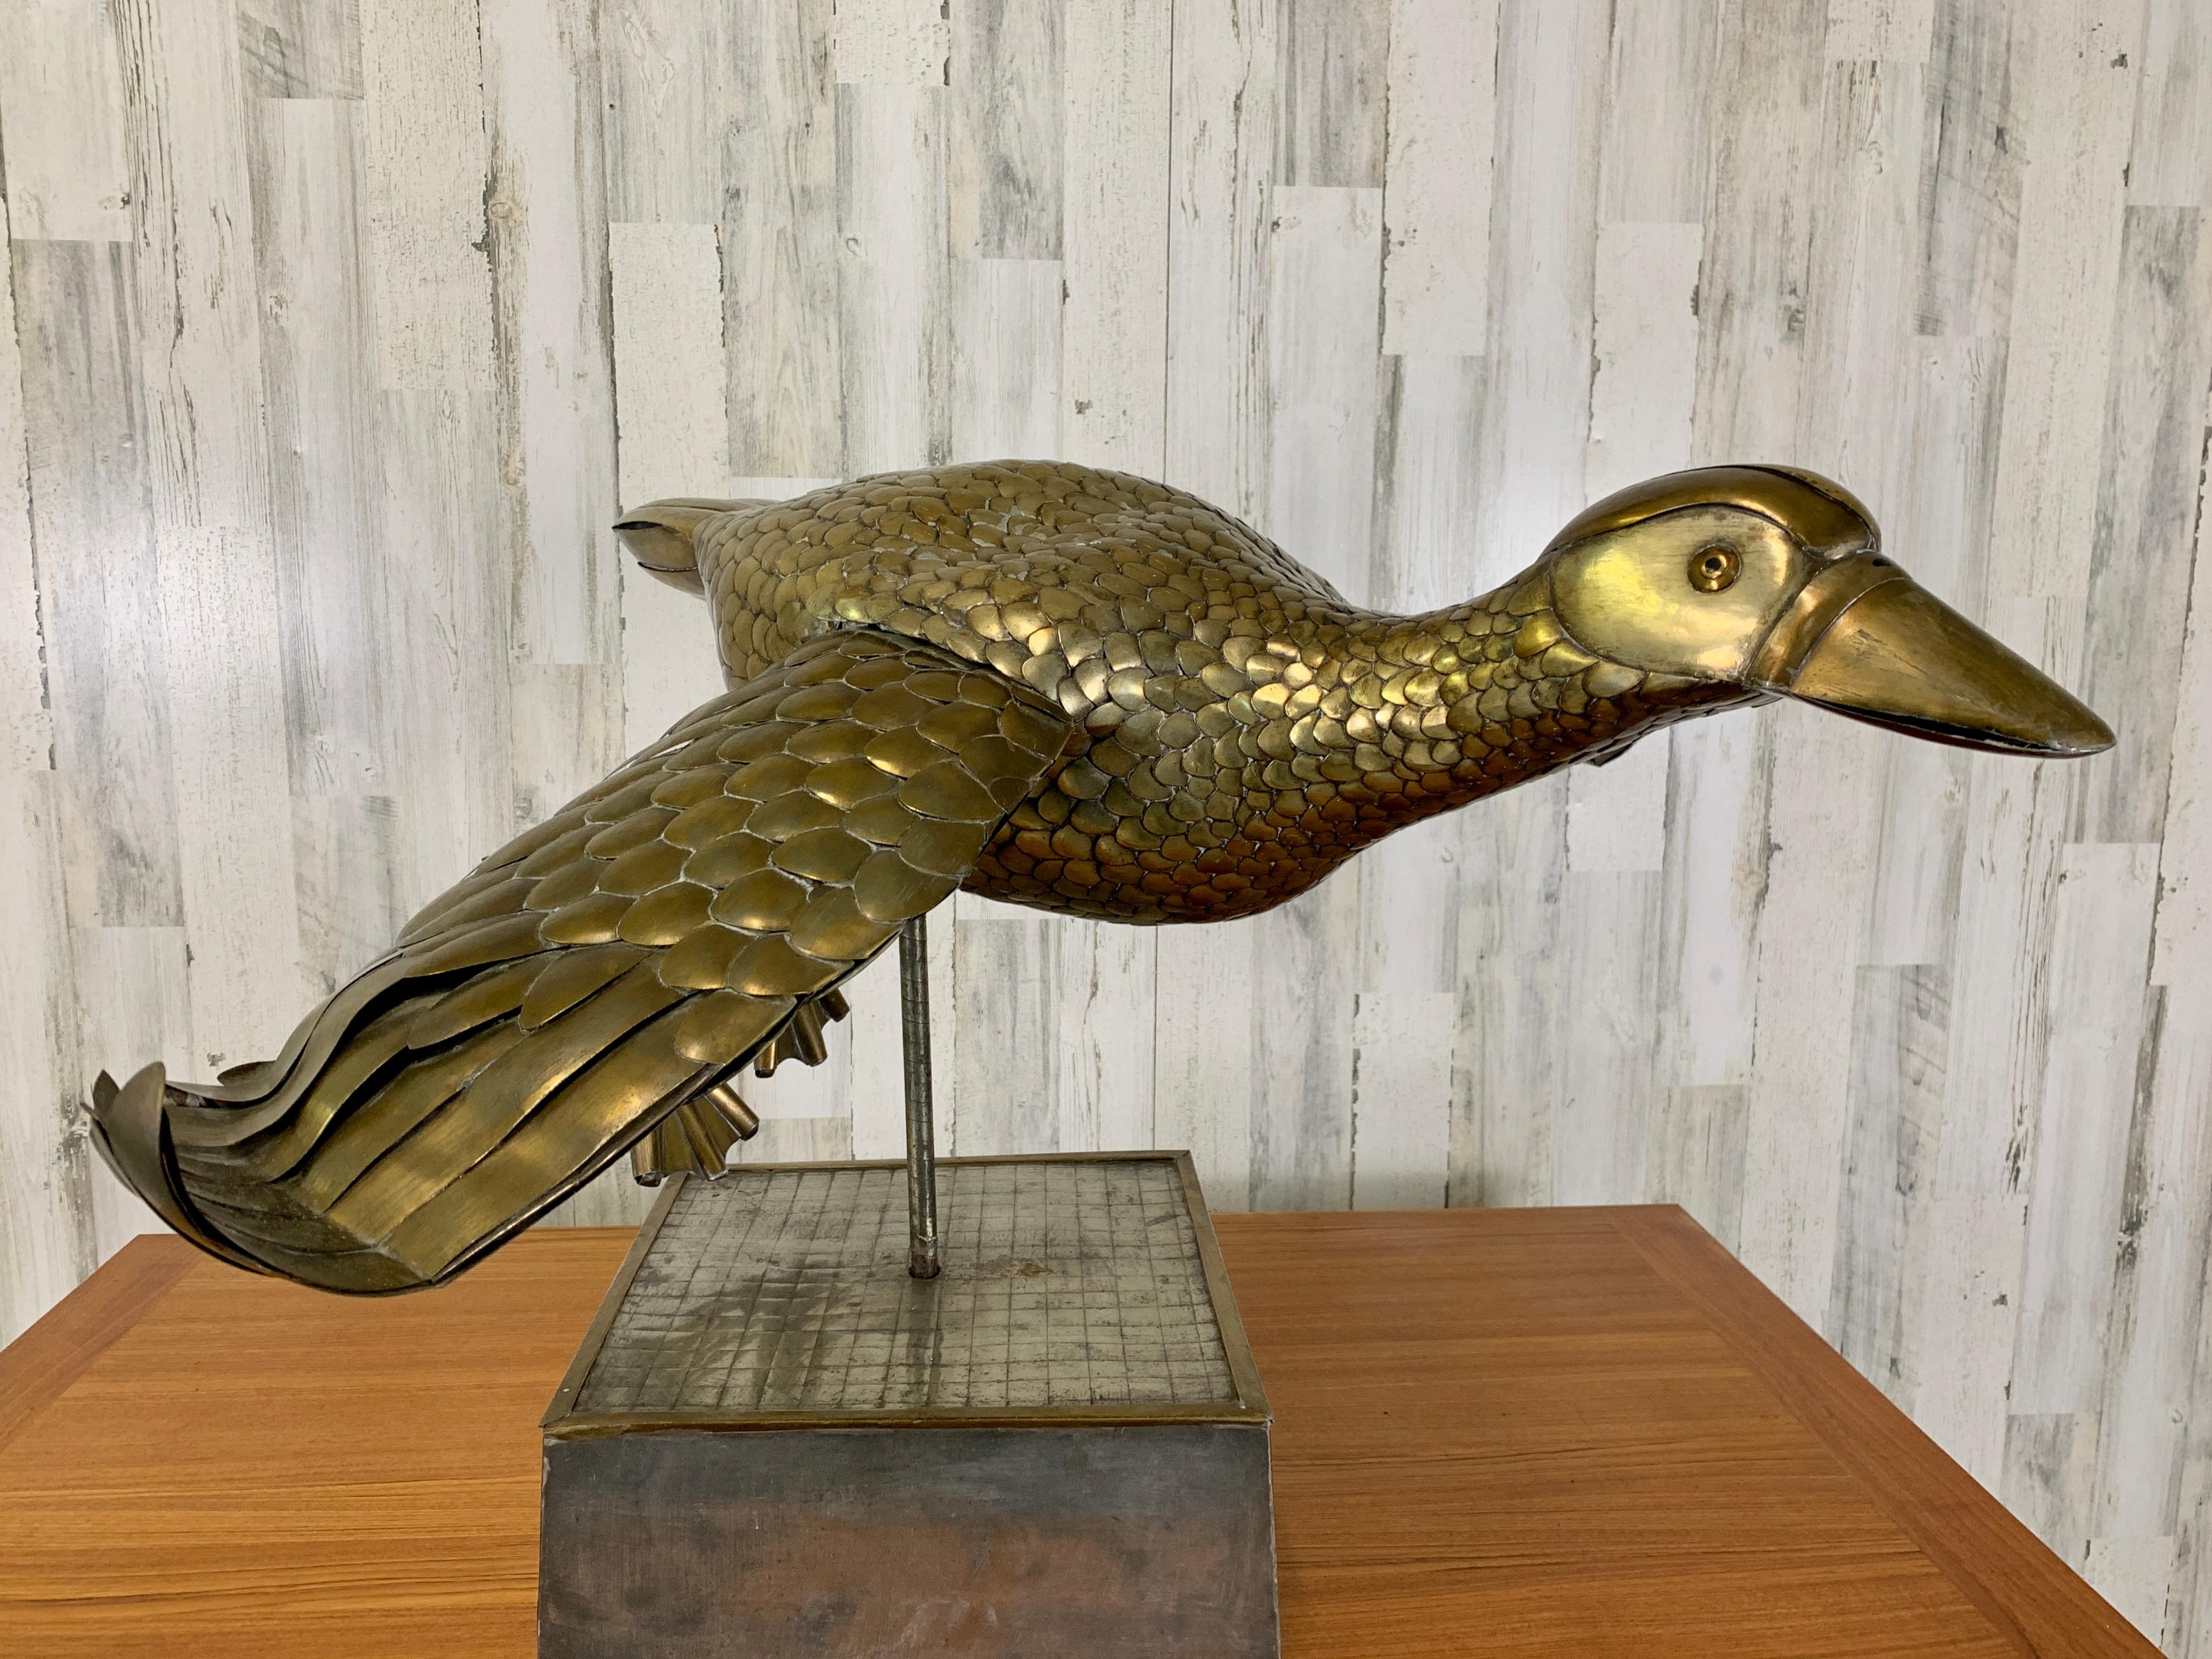 Limited Edition 2/100 Sergio Bustamante Flying Duck Sculpture 2